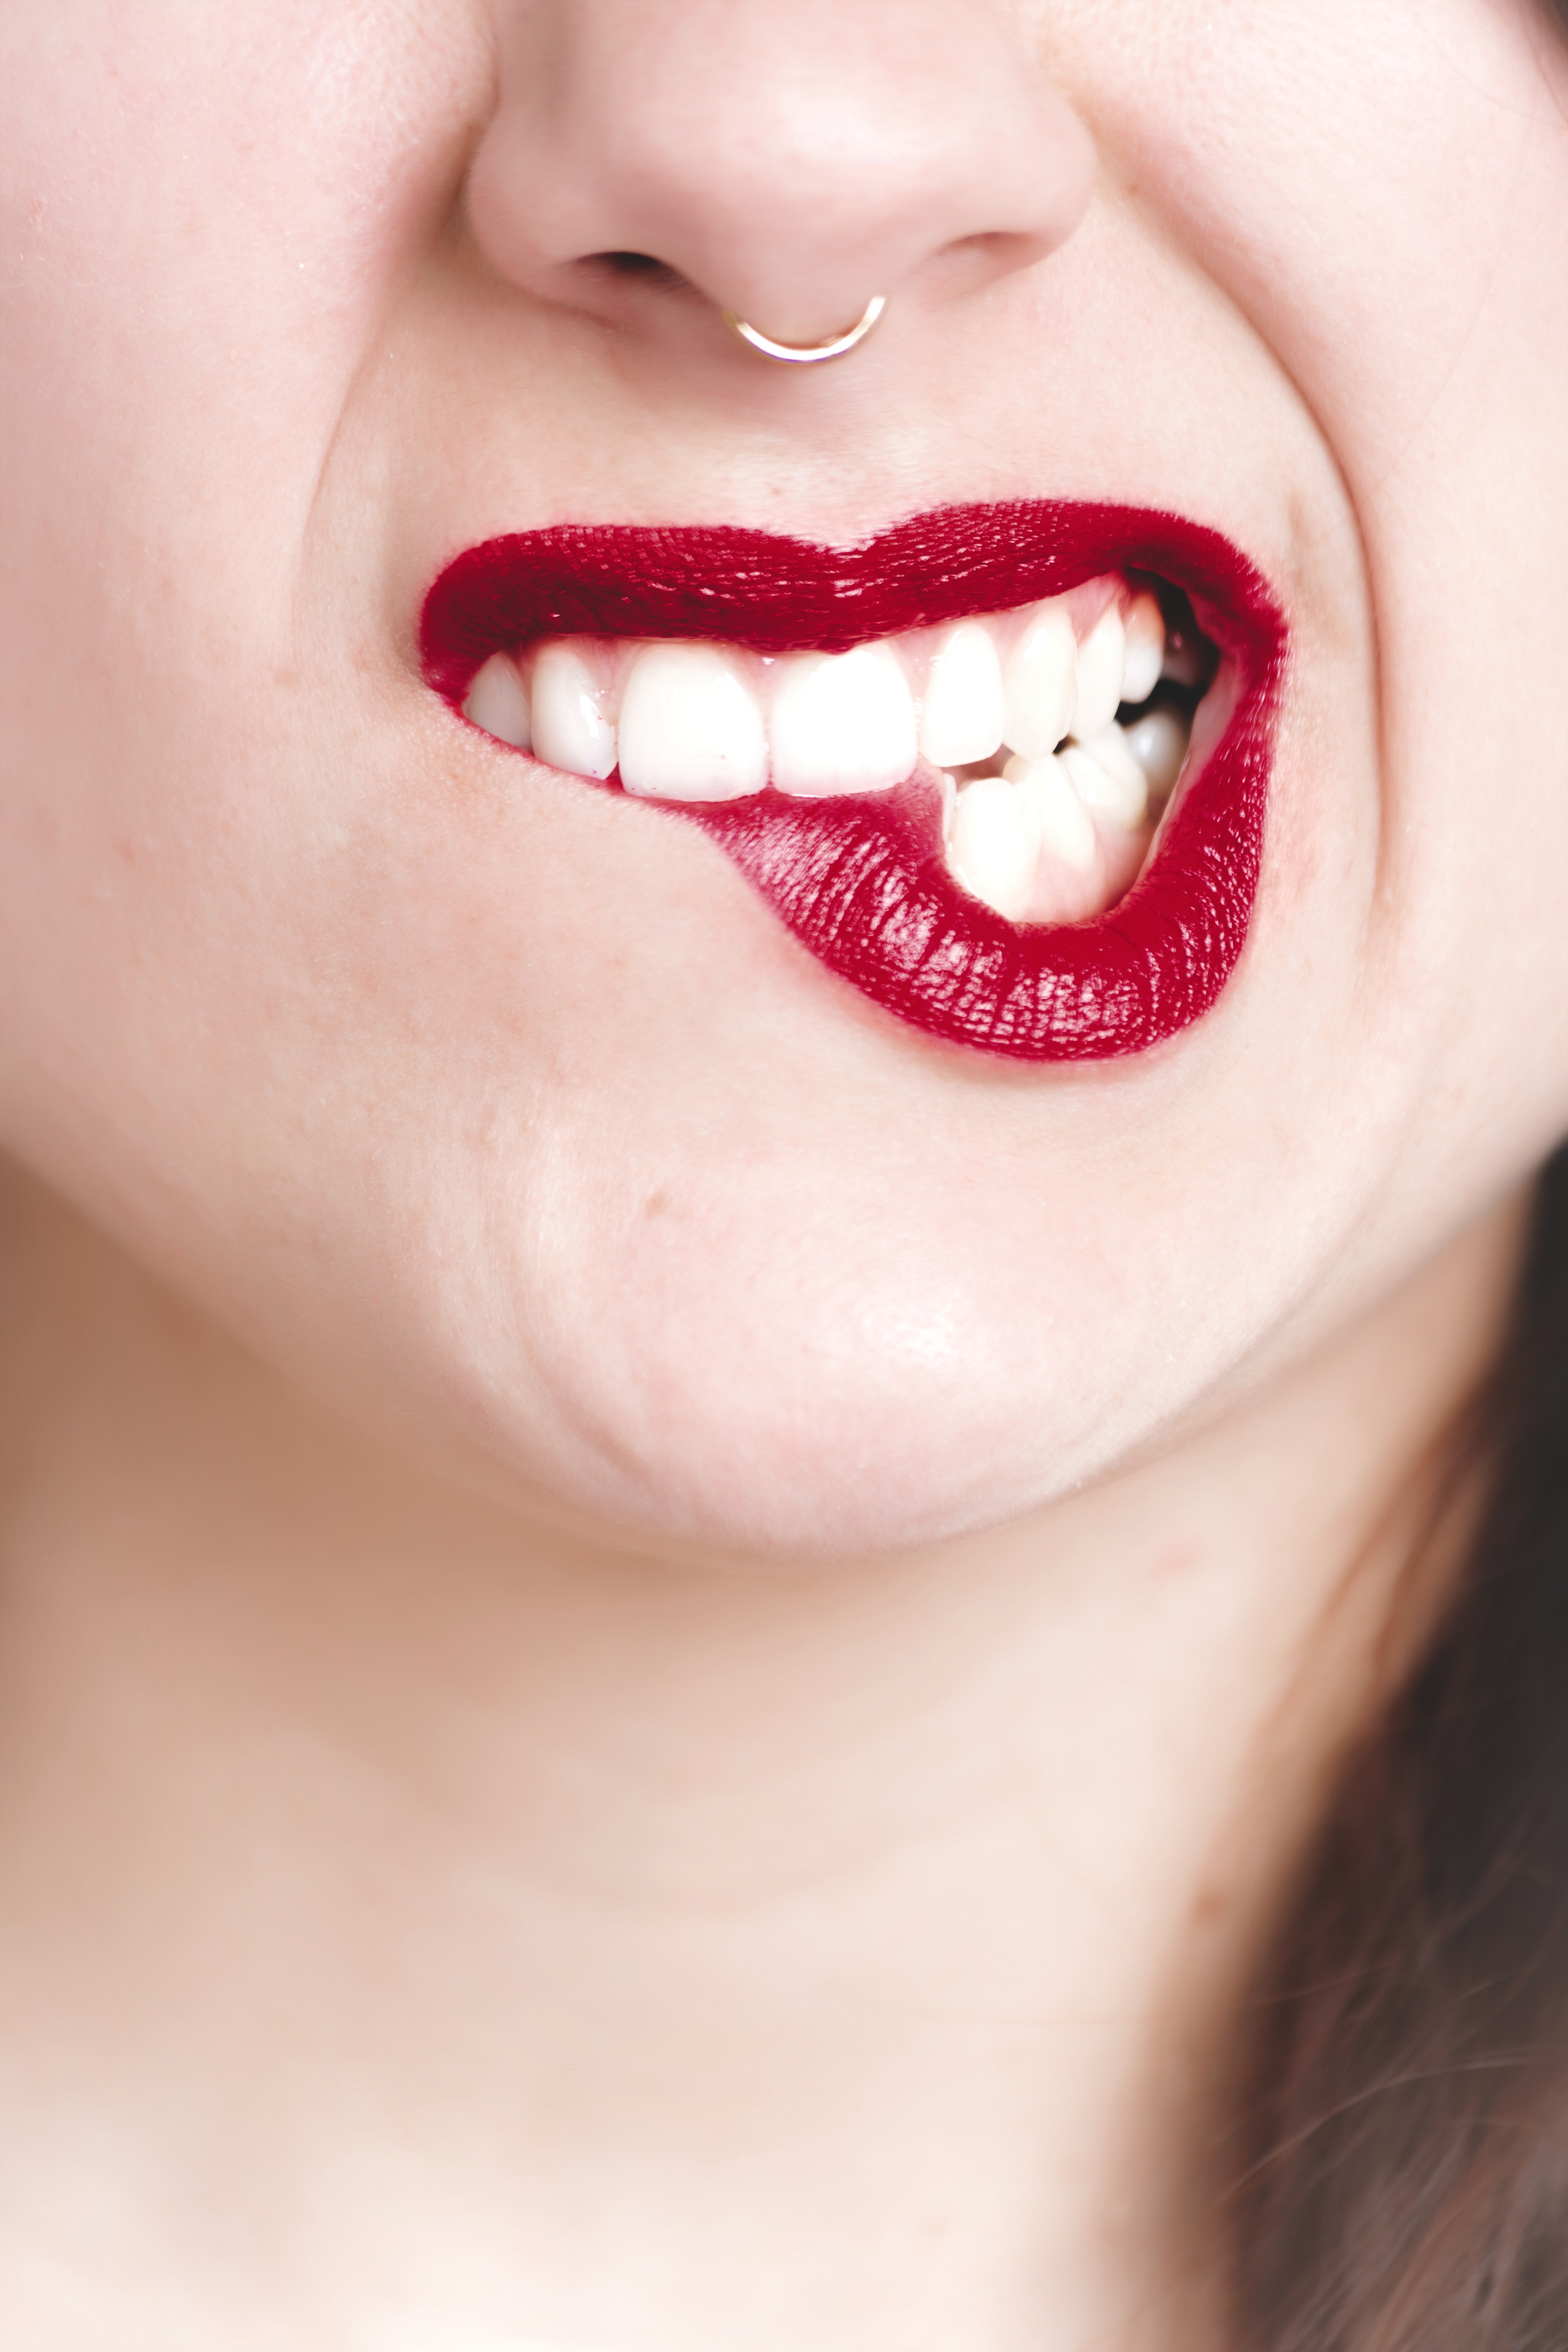 Variants for Photography of Woman's Red Lip.